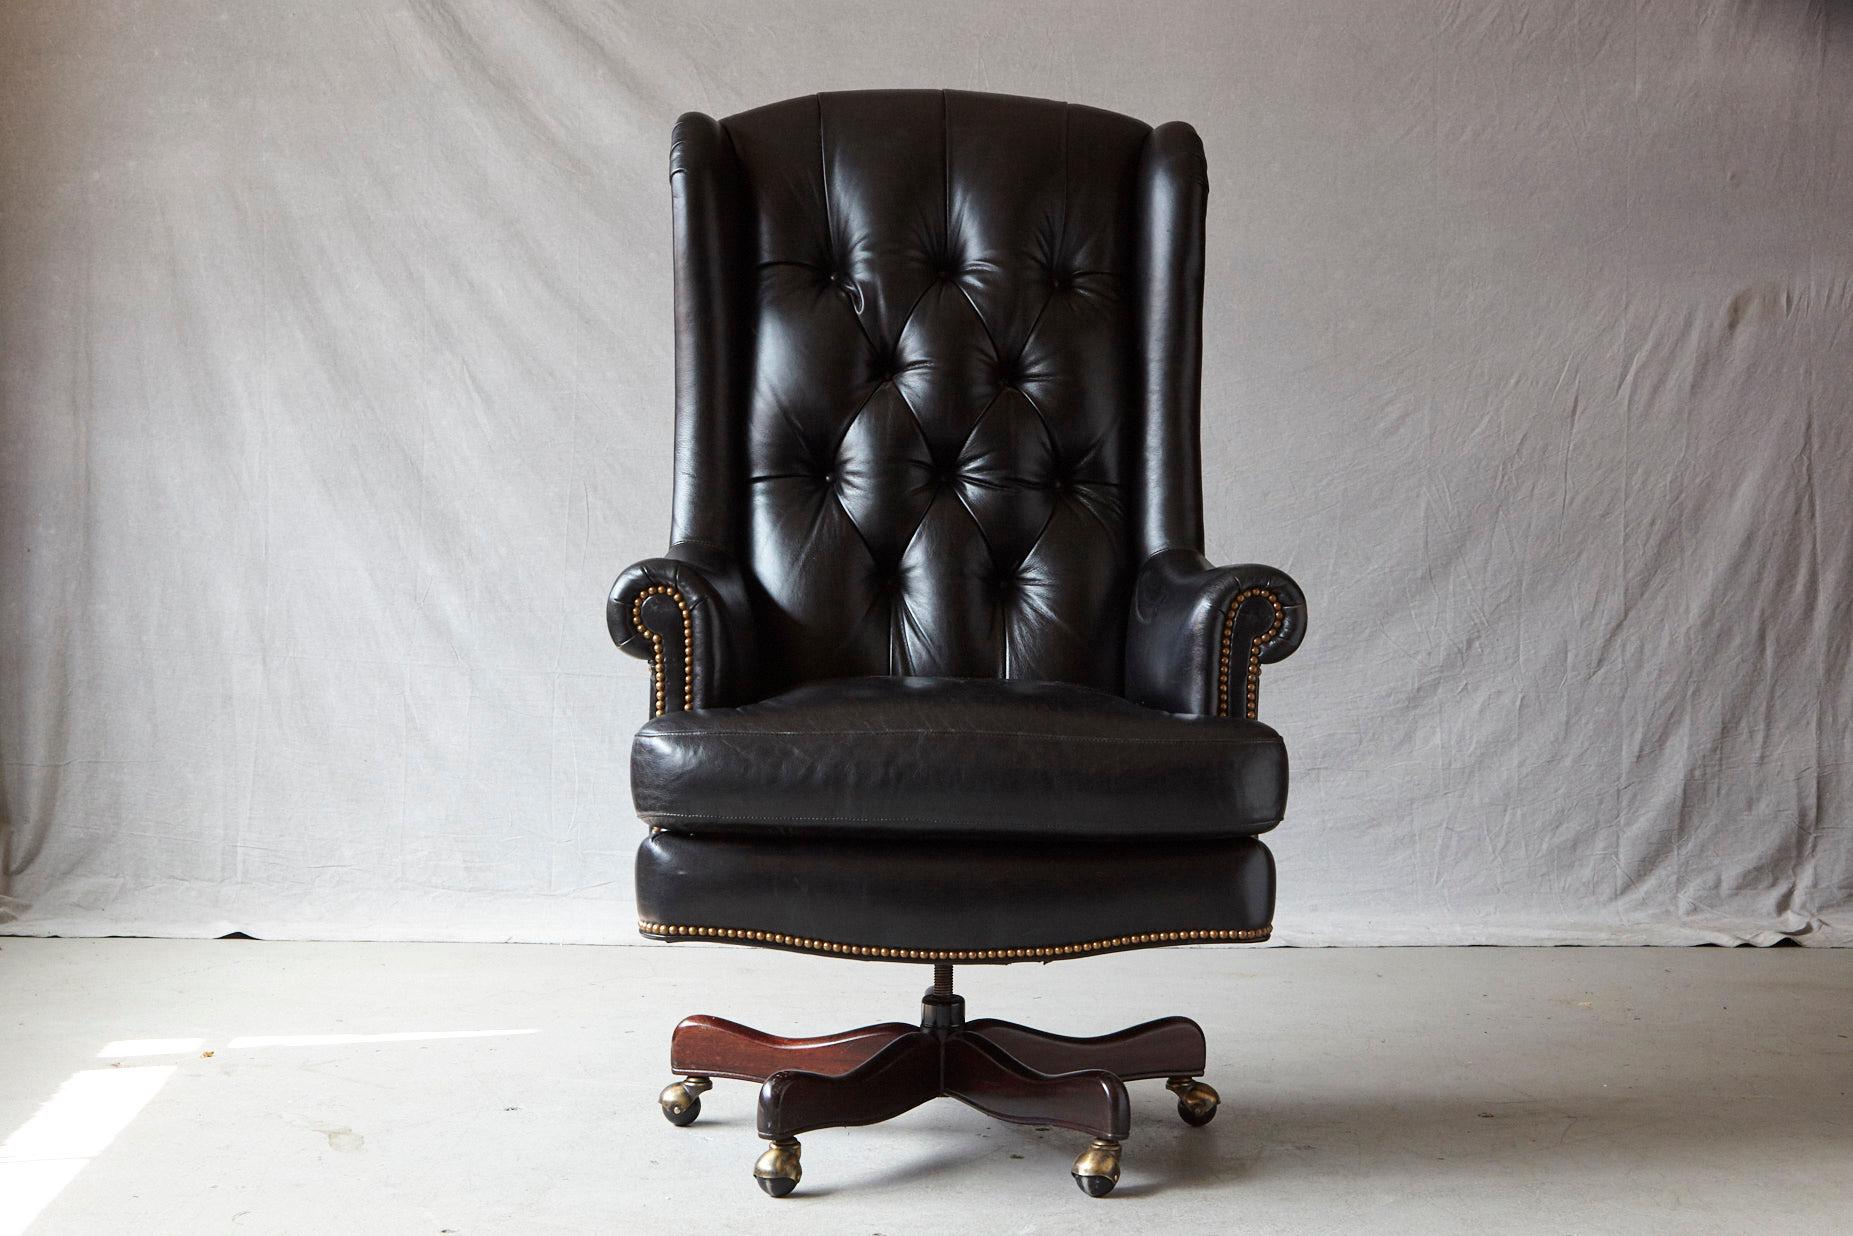 Very comfortable tufted black leather swivel and tilt executive chair with nailhead trim,
by Hancock & Moore, mounted on a mahogany base with casters.
Measures: Height 52.75 - 55.75 inches, seat height 22 - 25 inches, arm height 27 - 30